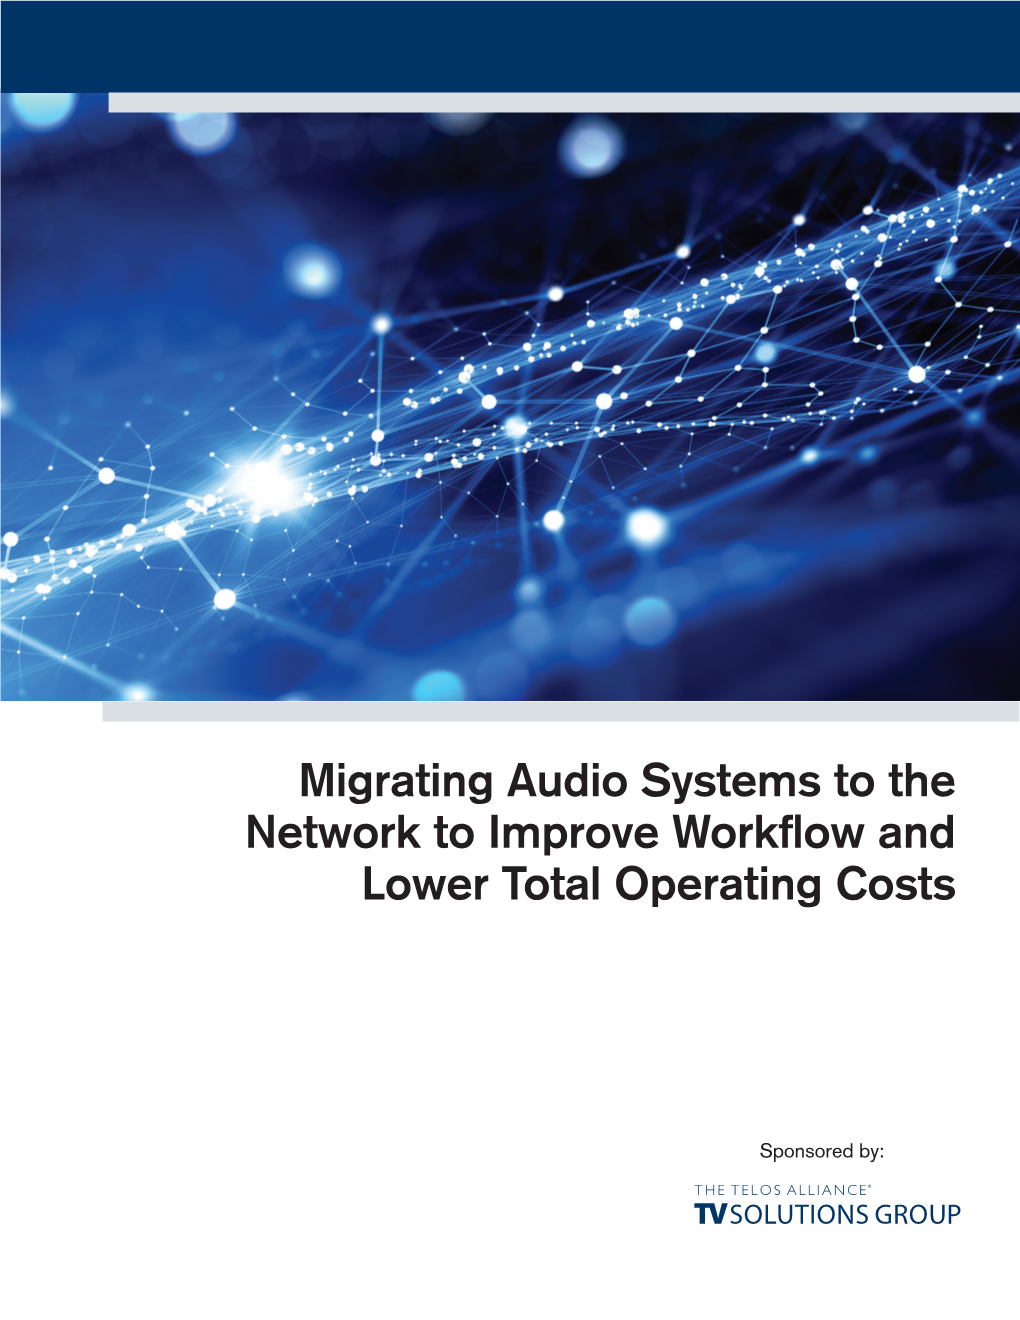 Migrating Audio Systems to the Network to Improve Workflow and Lower Total Operating Costs